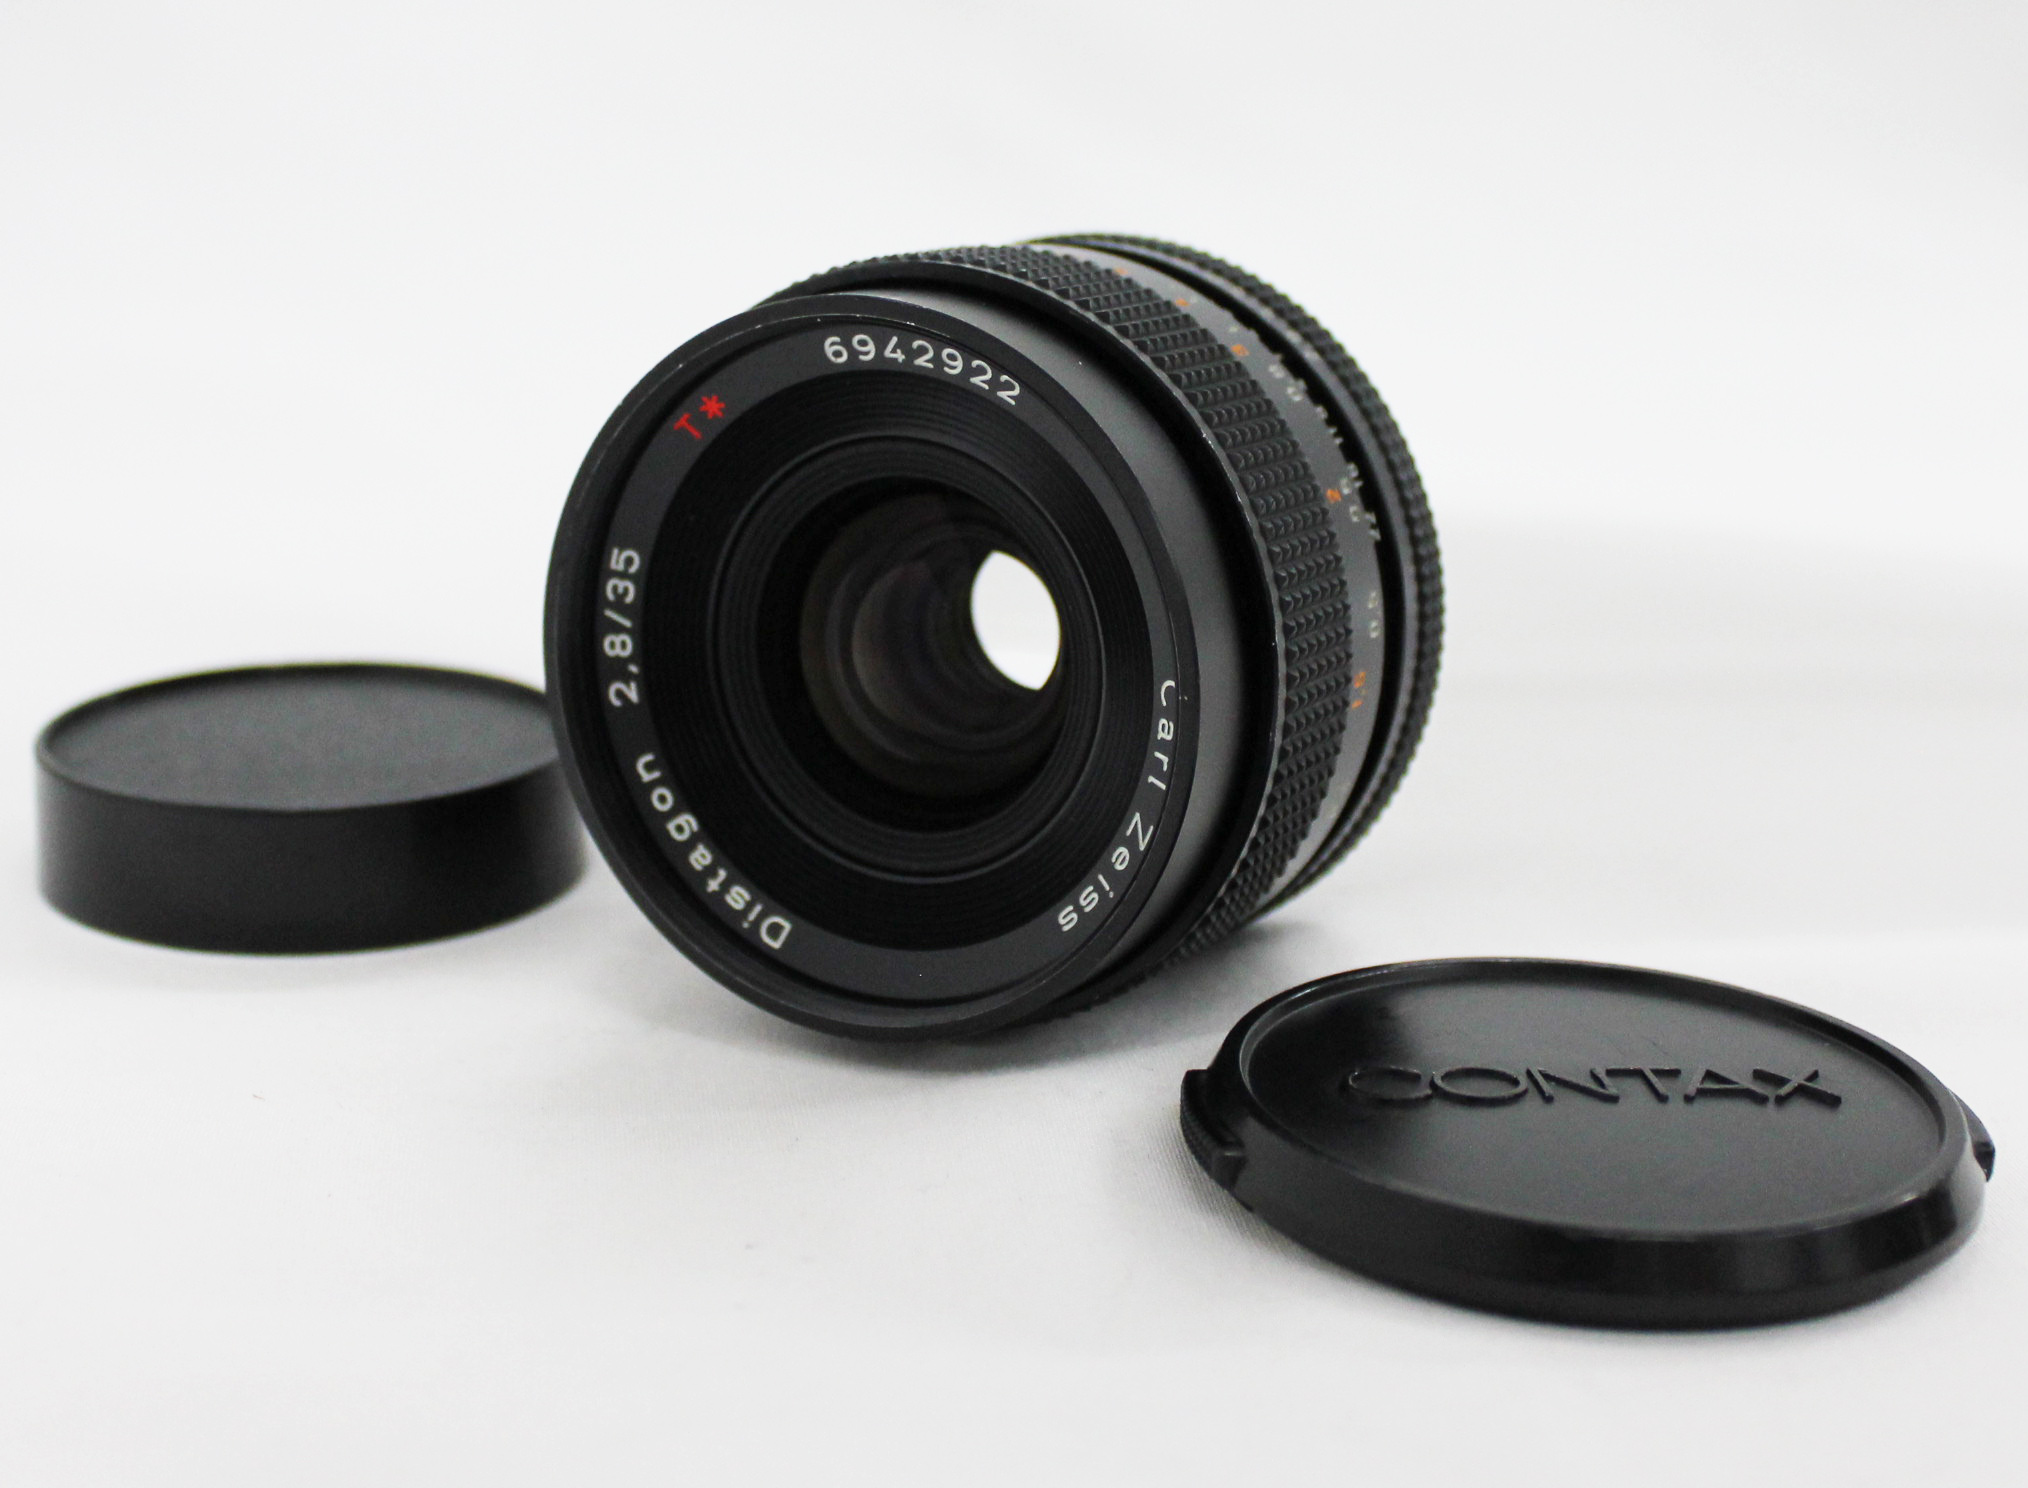  Contax Carl Zeiss Distagon T* 35mm F2.8 MMJ MF Lens from Japan Photo 0